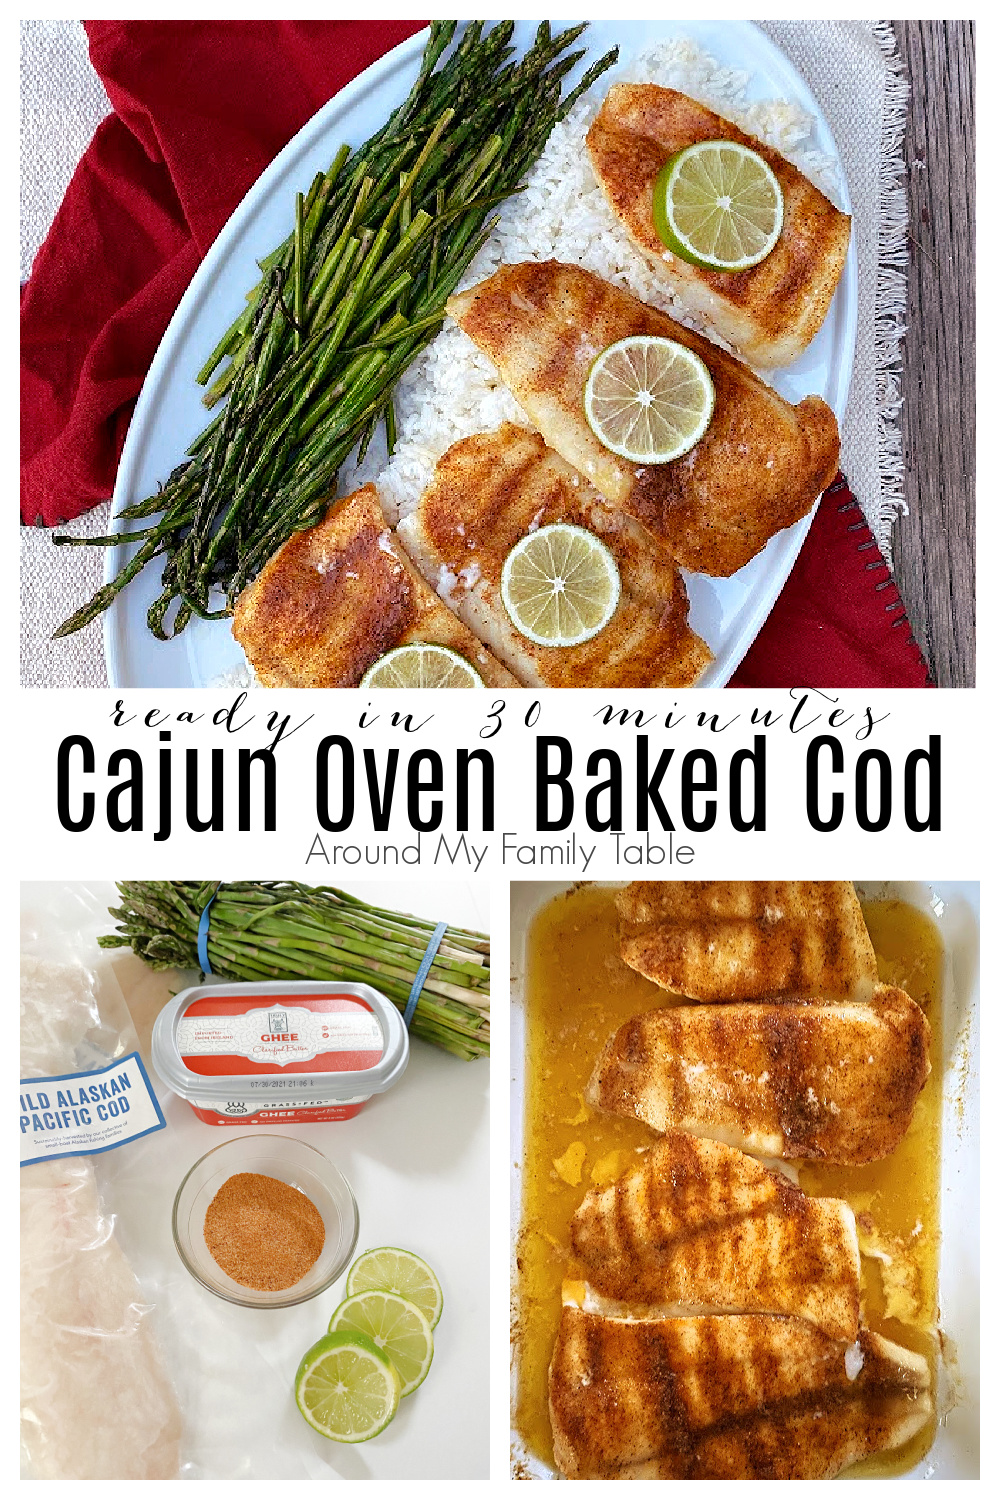 Cajun Oven Baked Cod is ready in under 30 minutes and perfect for a quick weeknight supper (including sides).  Homemade cajun seasoning and ghee, gives the cod so much flavor that the whole family will love it.  via @slingmama